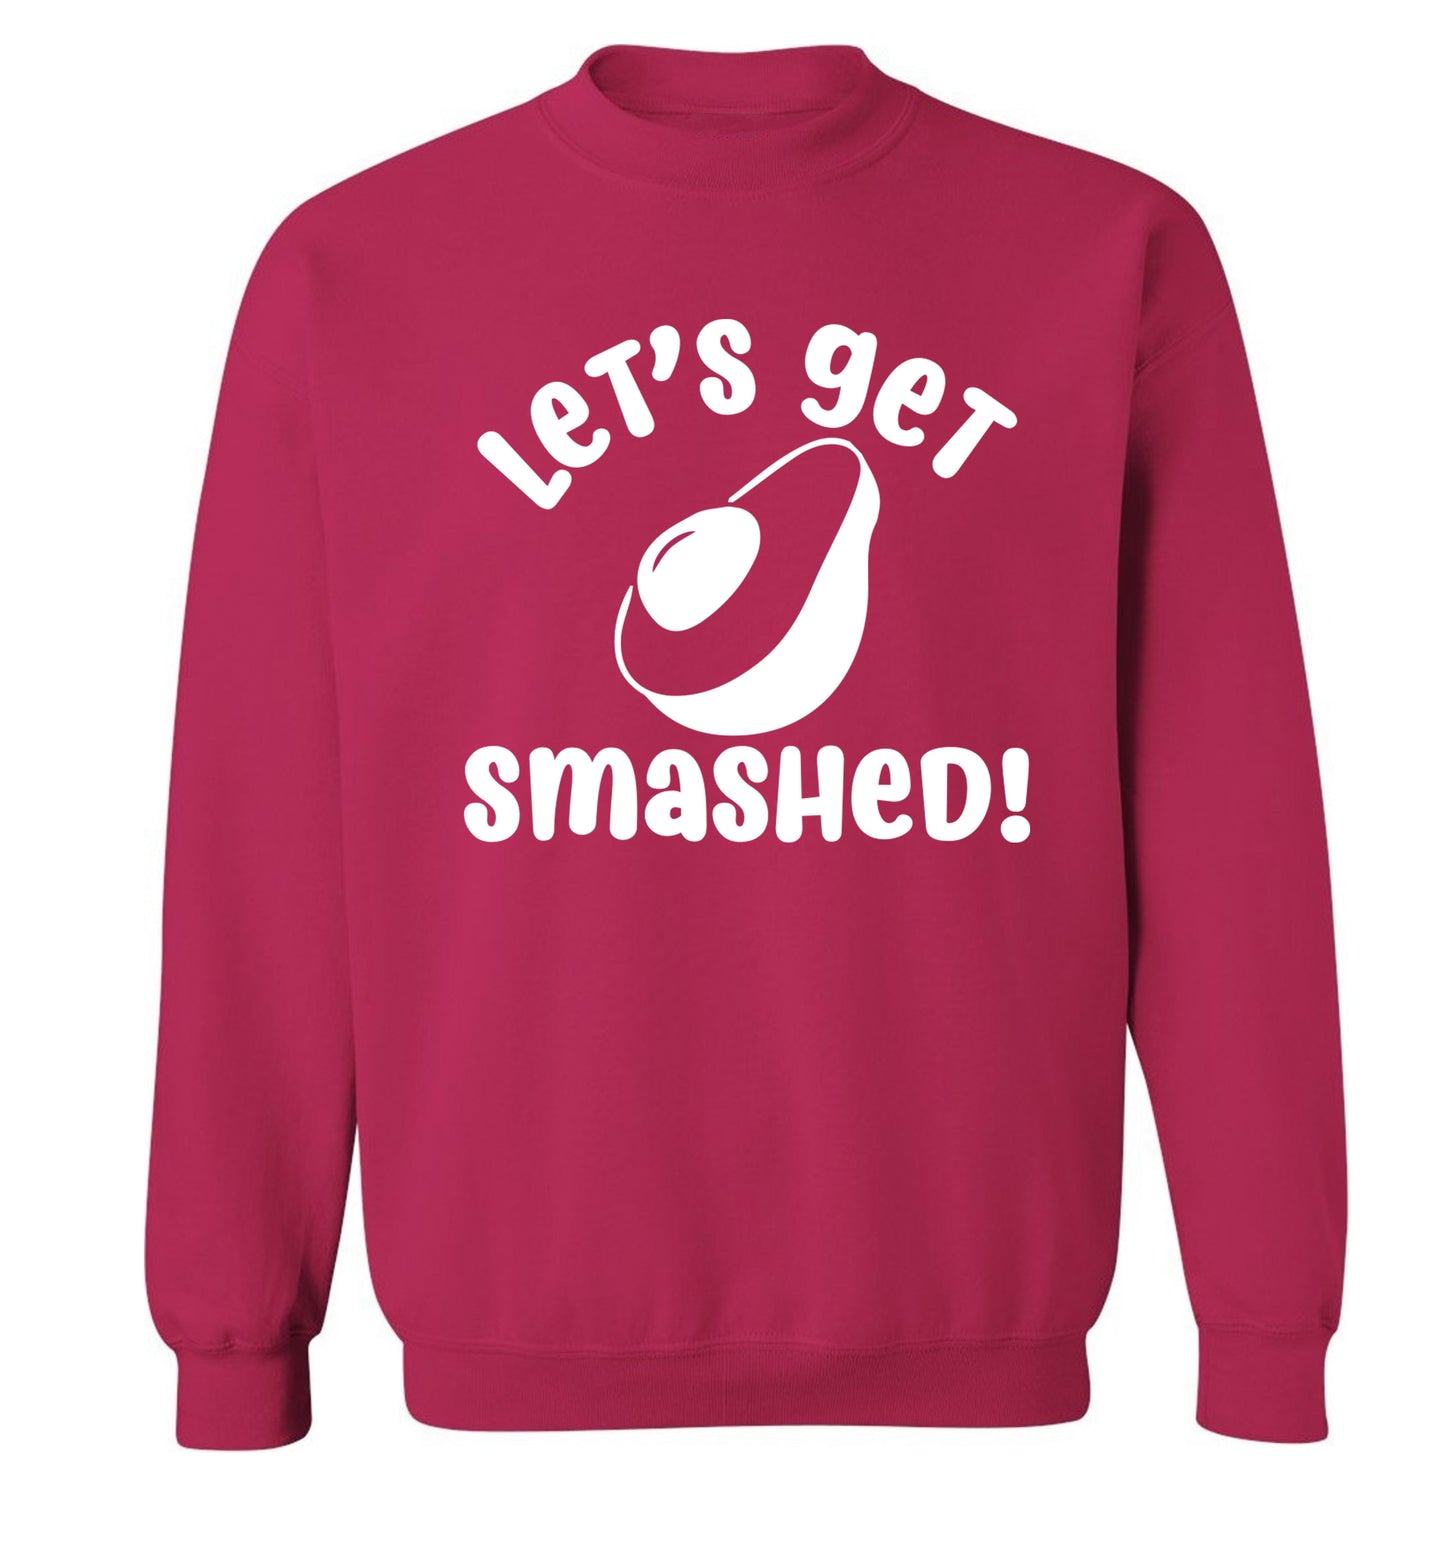 Let's get smashed Adult's unisex pink Sweater 2XL